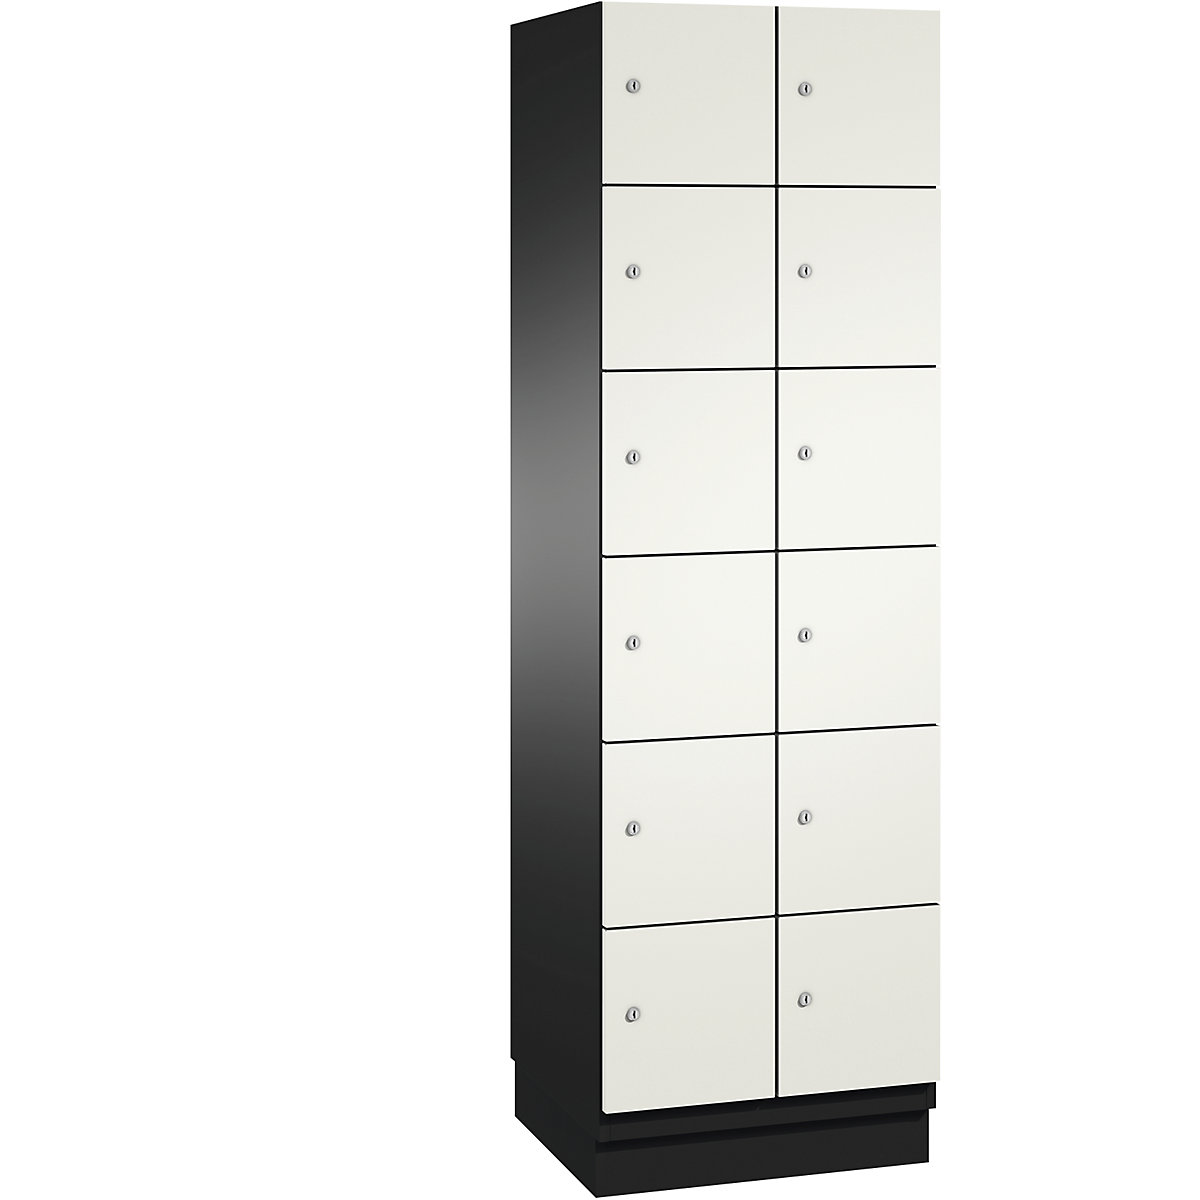 CAMBIO compartment locker with sheet steel doors – C+P, 12 compartments, width 600 mm, body black grey / door pure white-4